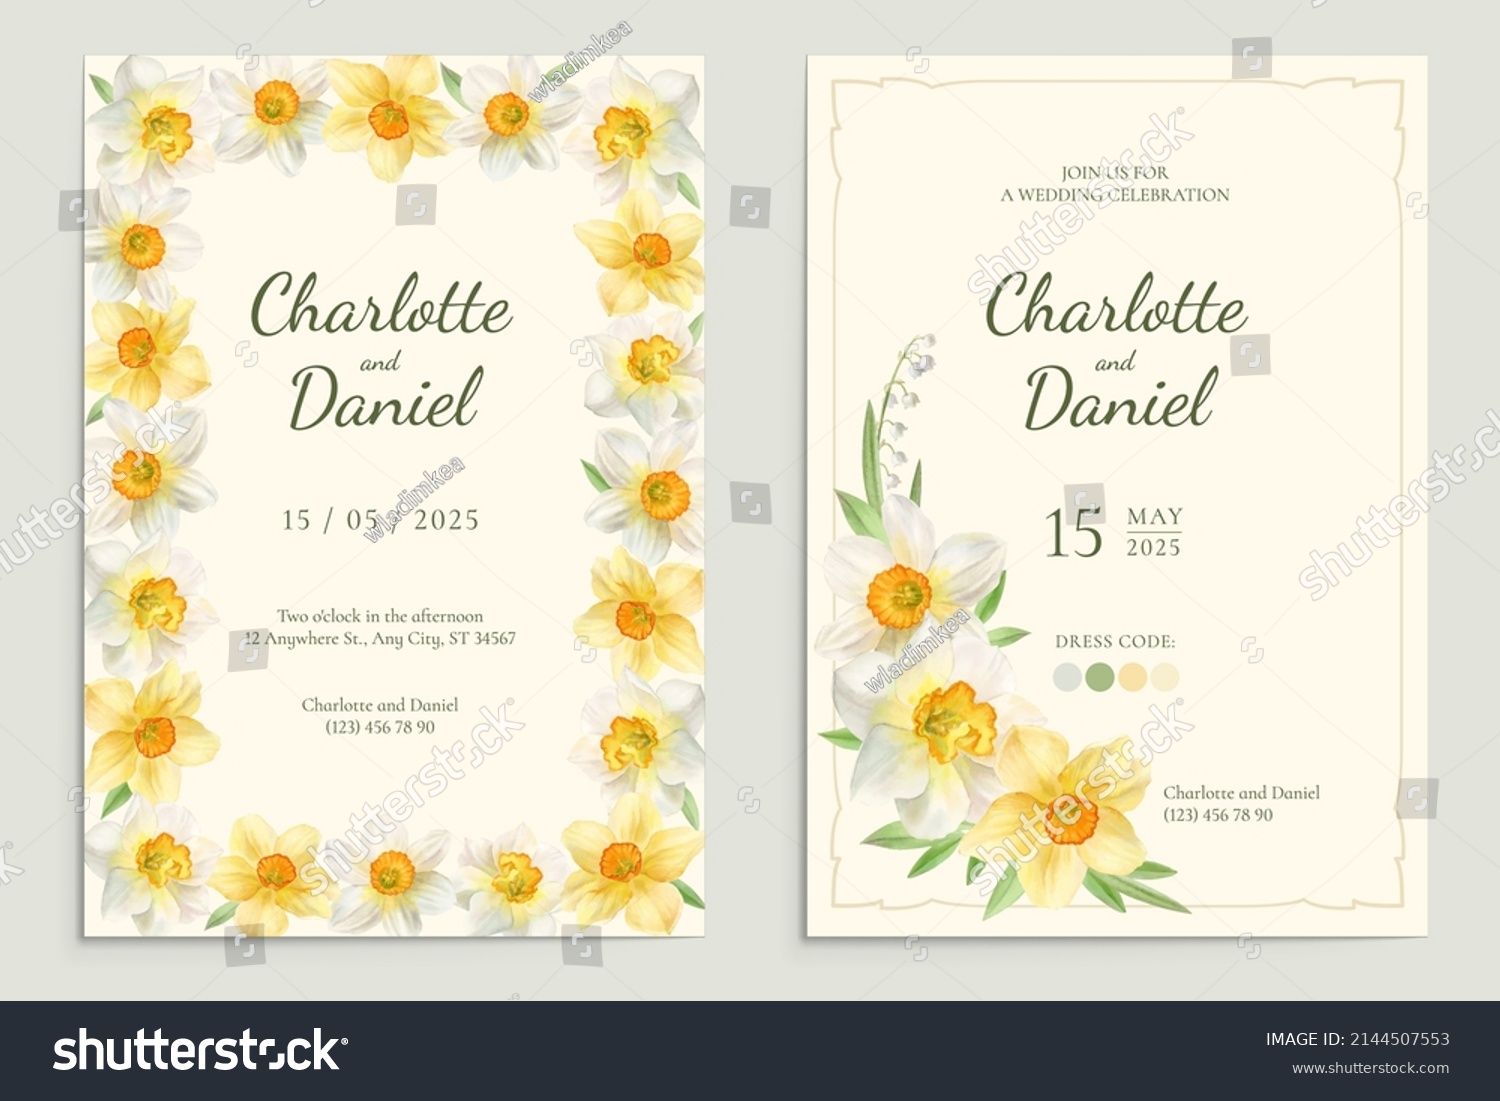 SVG of Wedding invitation with yellow daffodils, template, vector illustration svg